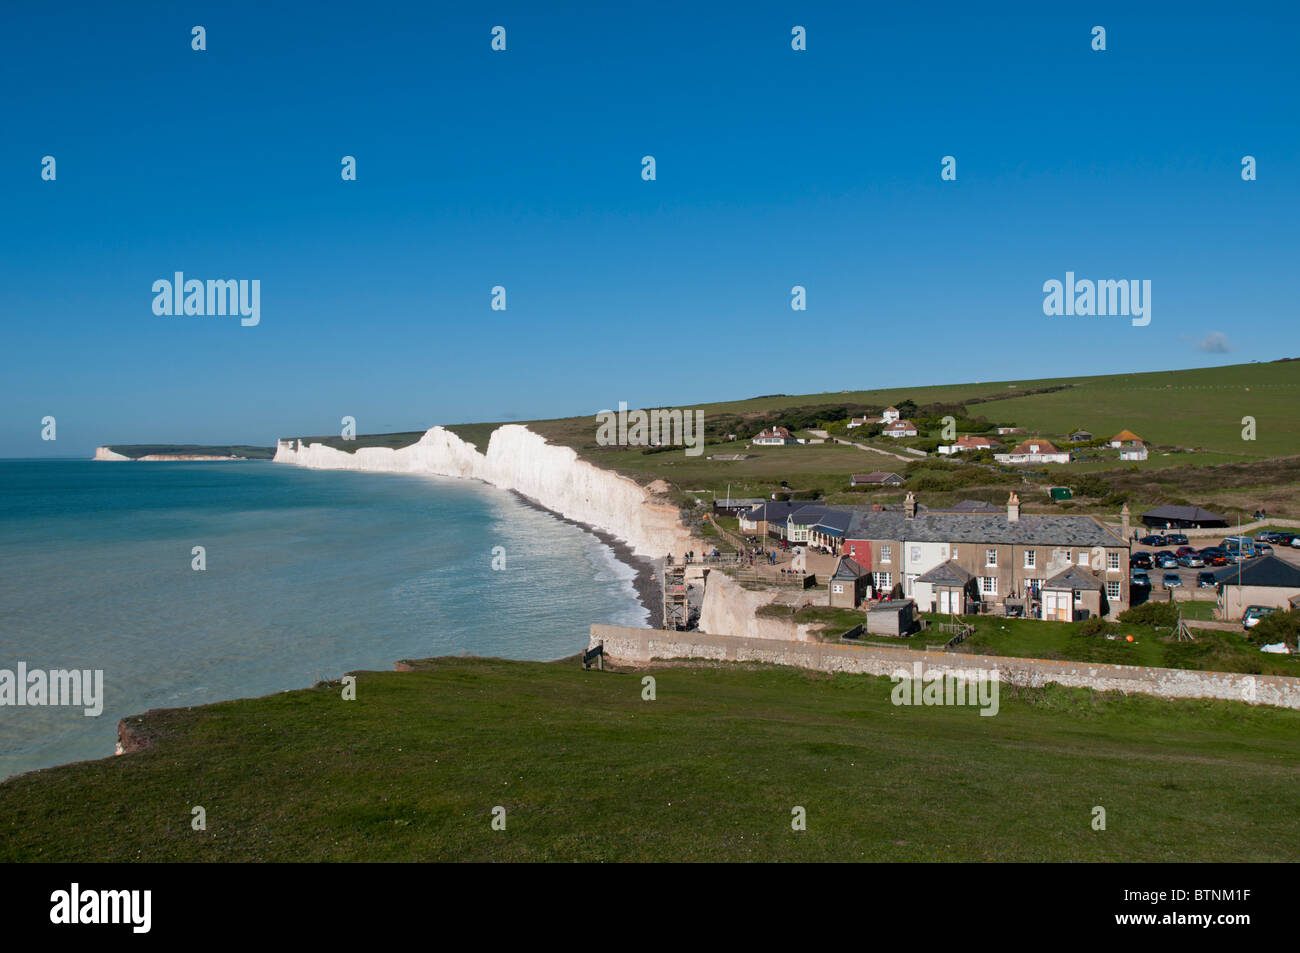 BIRLING GAP, EAST SUSSEX, ENGLAND, 24th October 2010 - A view of Birling Gap on the East Sussex coast. EDITORIAL USE ONLY. Stock Photo